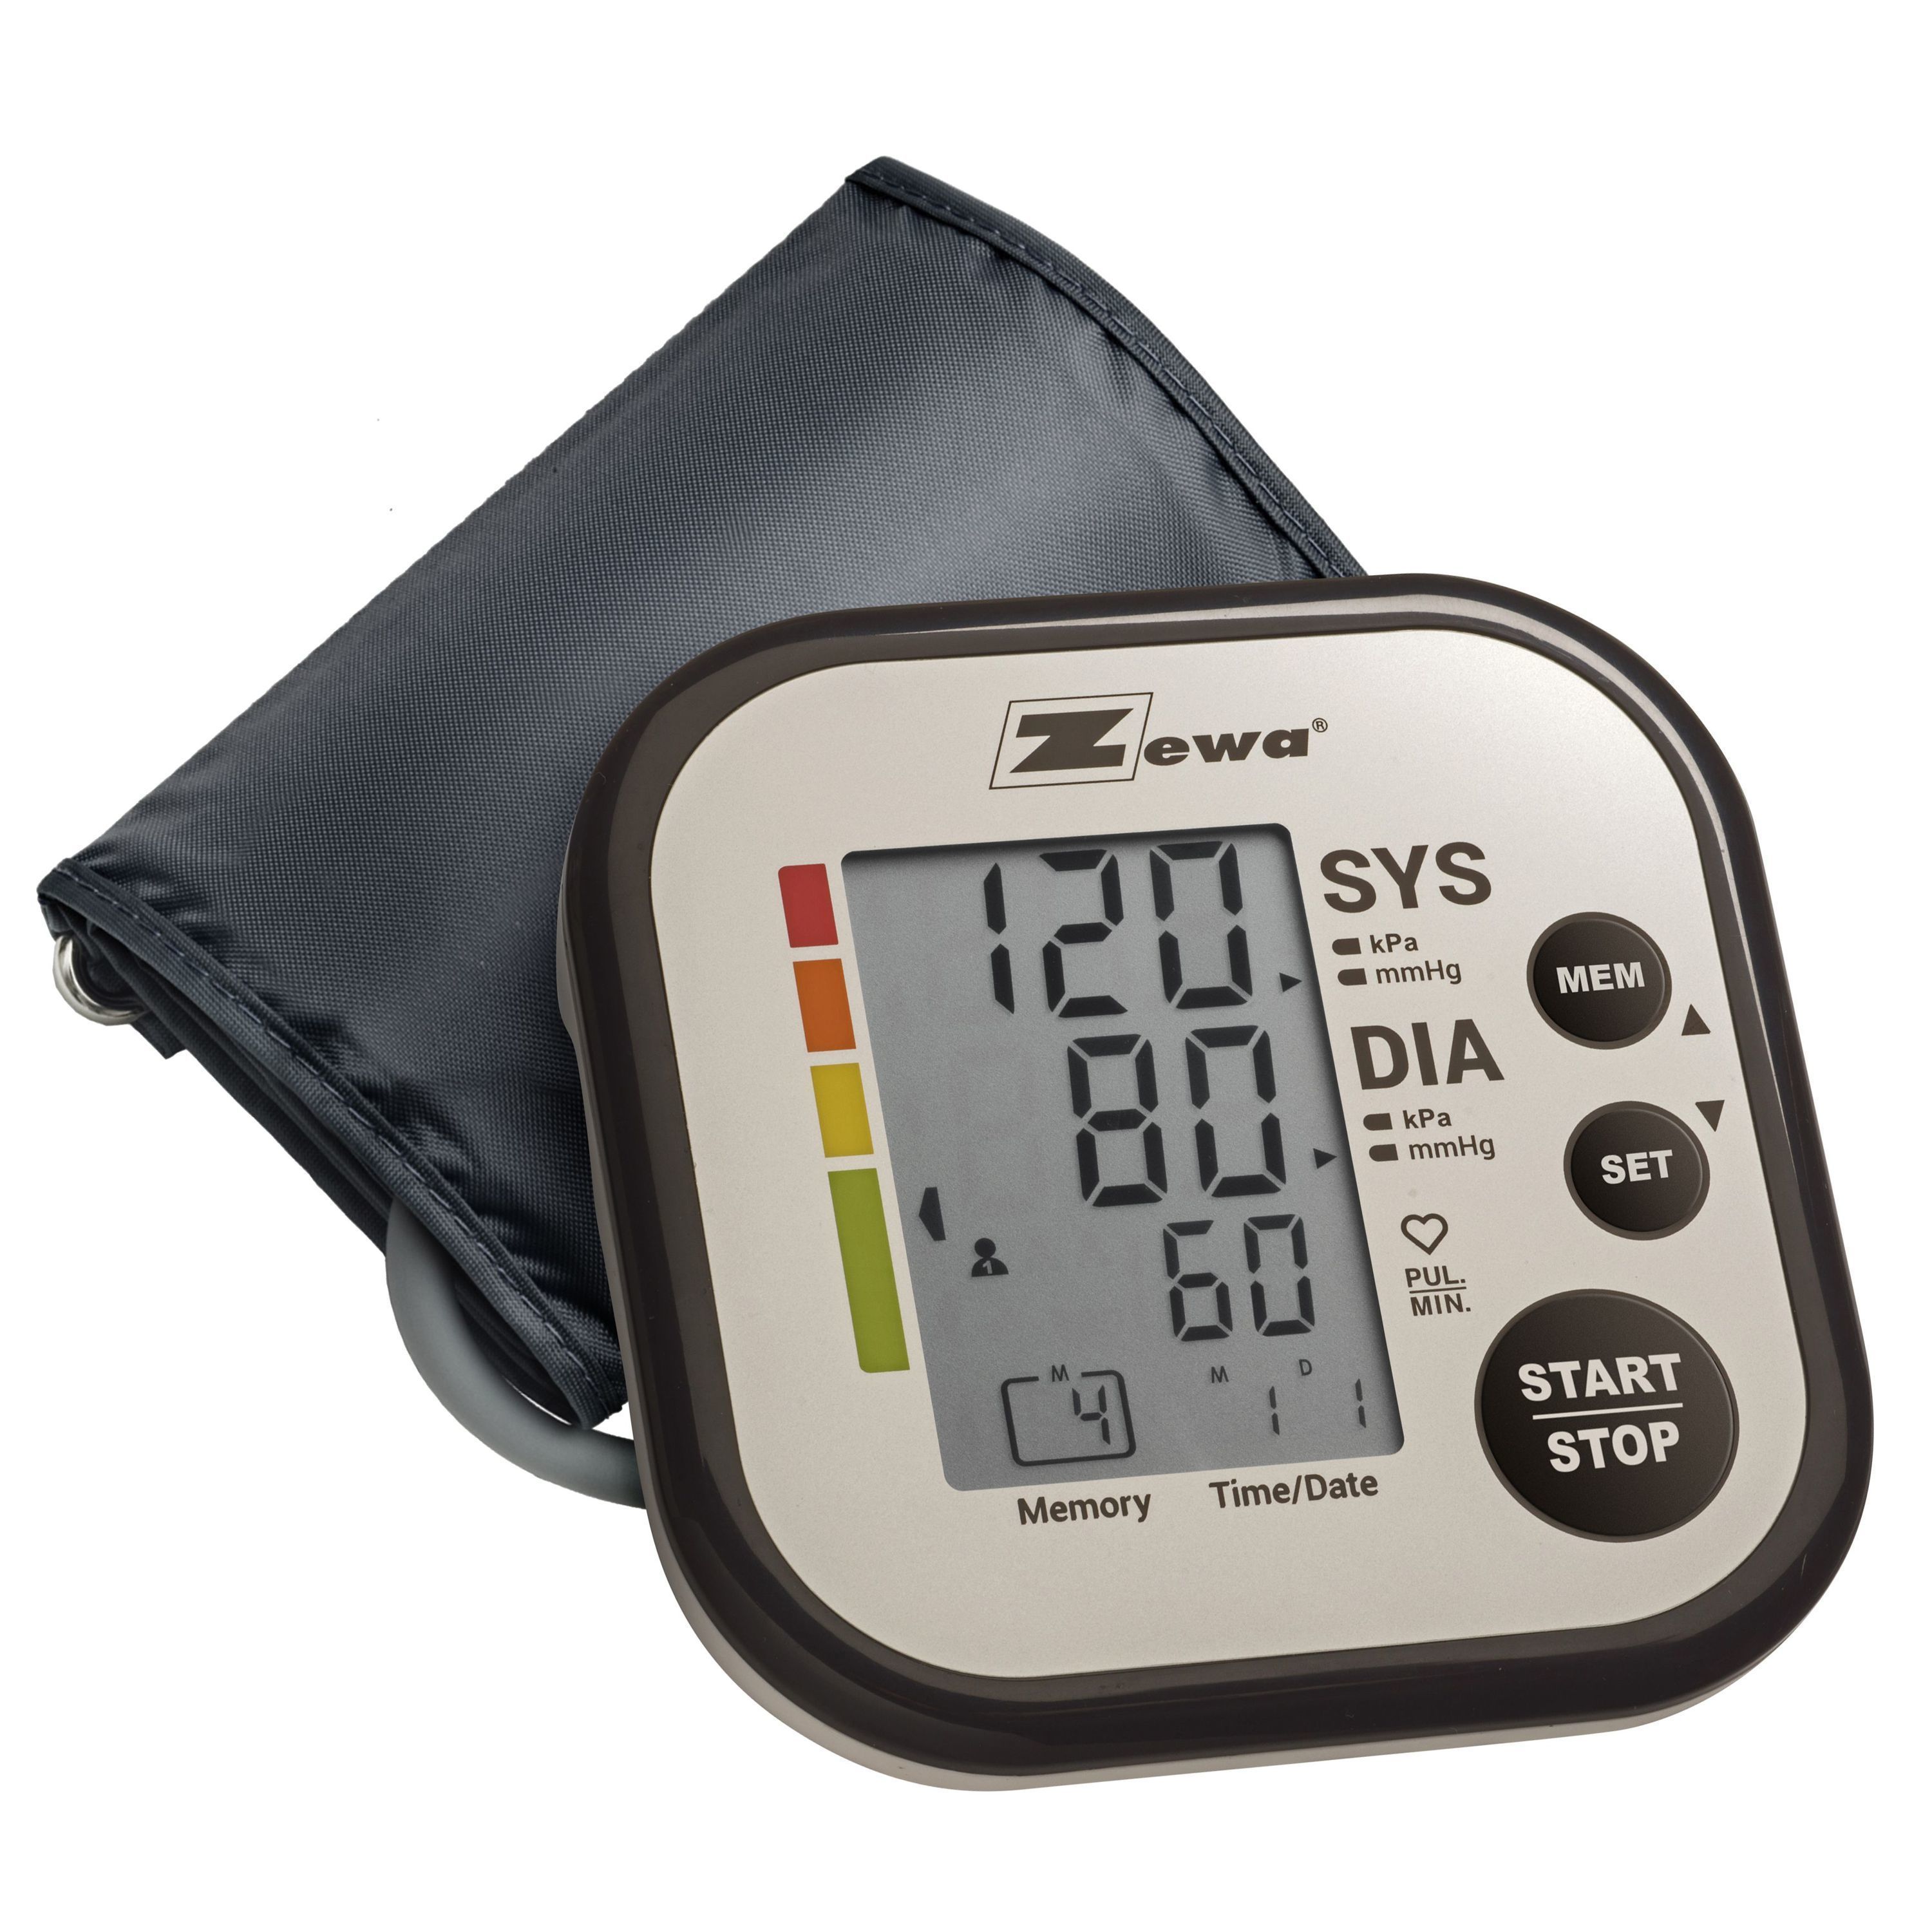 A&D Medical One-step Plus Memory Blood Pressure Monitor with Small Cuff,  1/EA